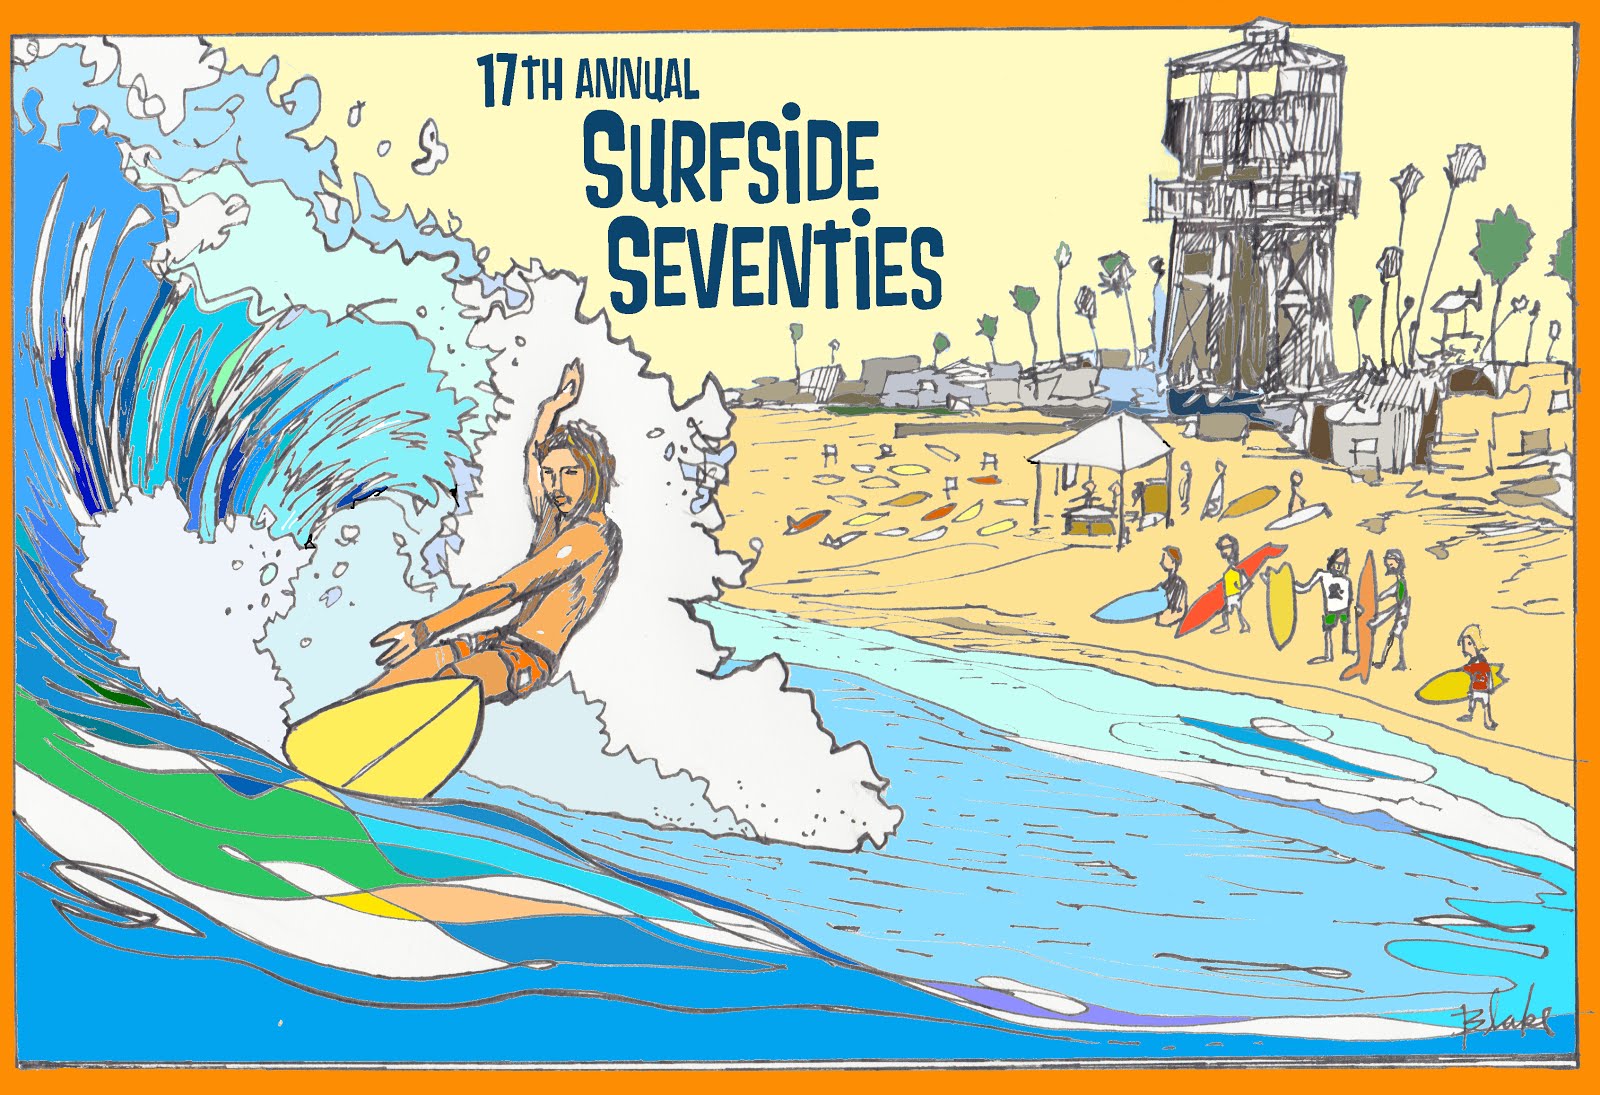 2015 17th annual Surfside Seventies